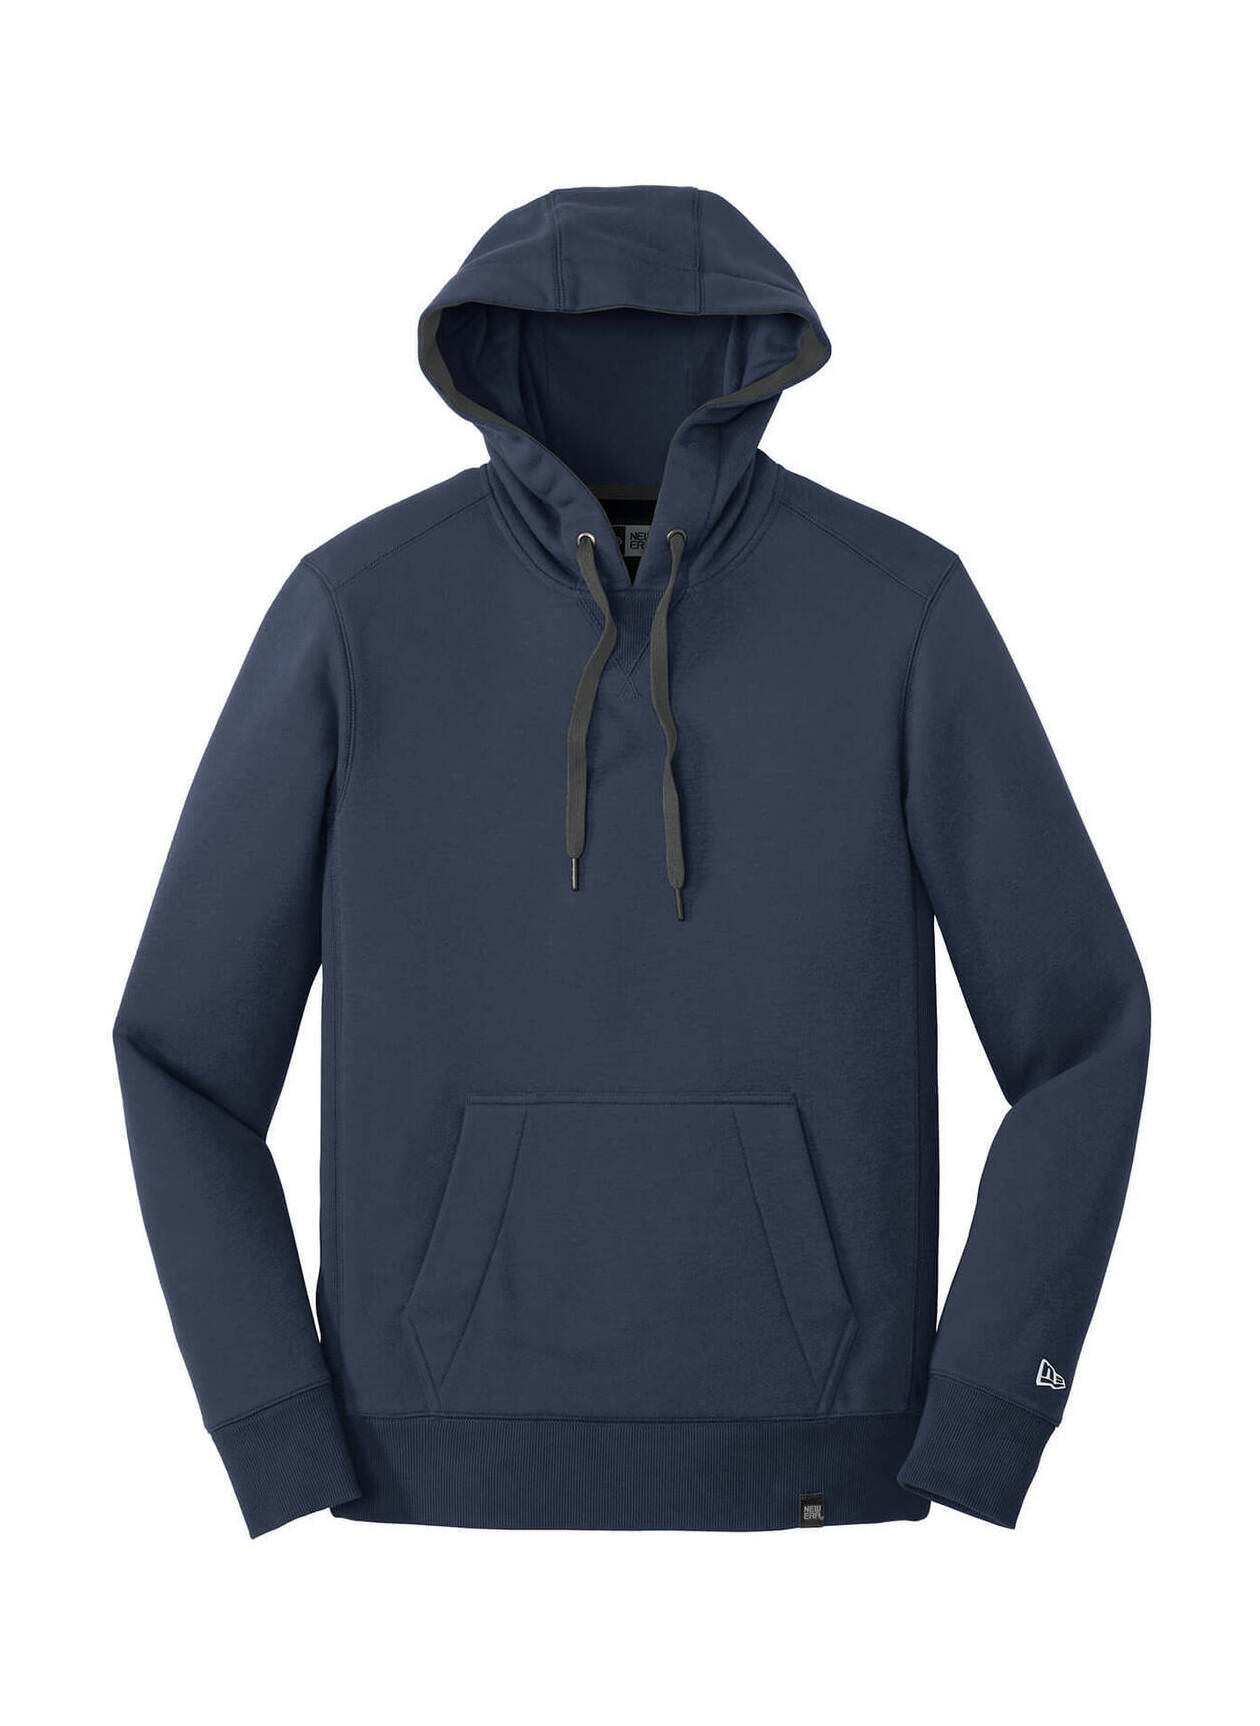 New Era Ladies French Terry Pullover Hoodie, Product